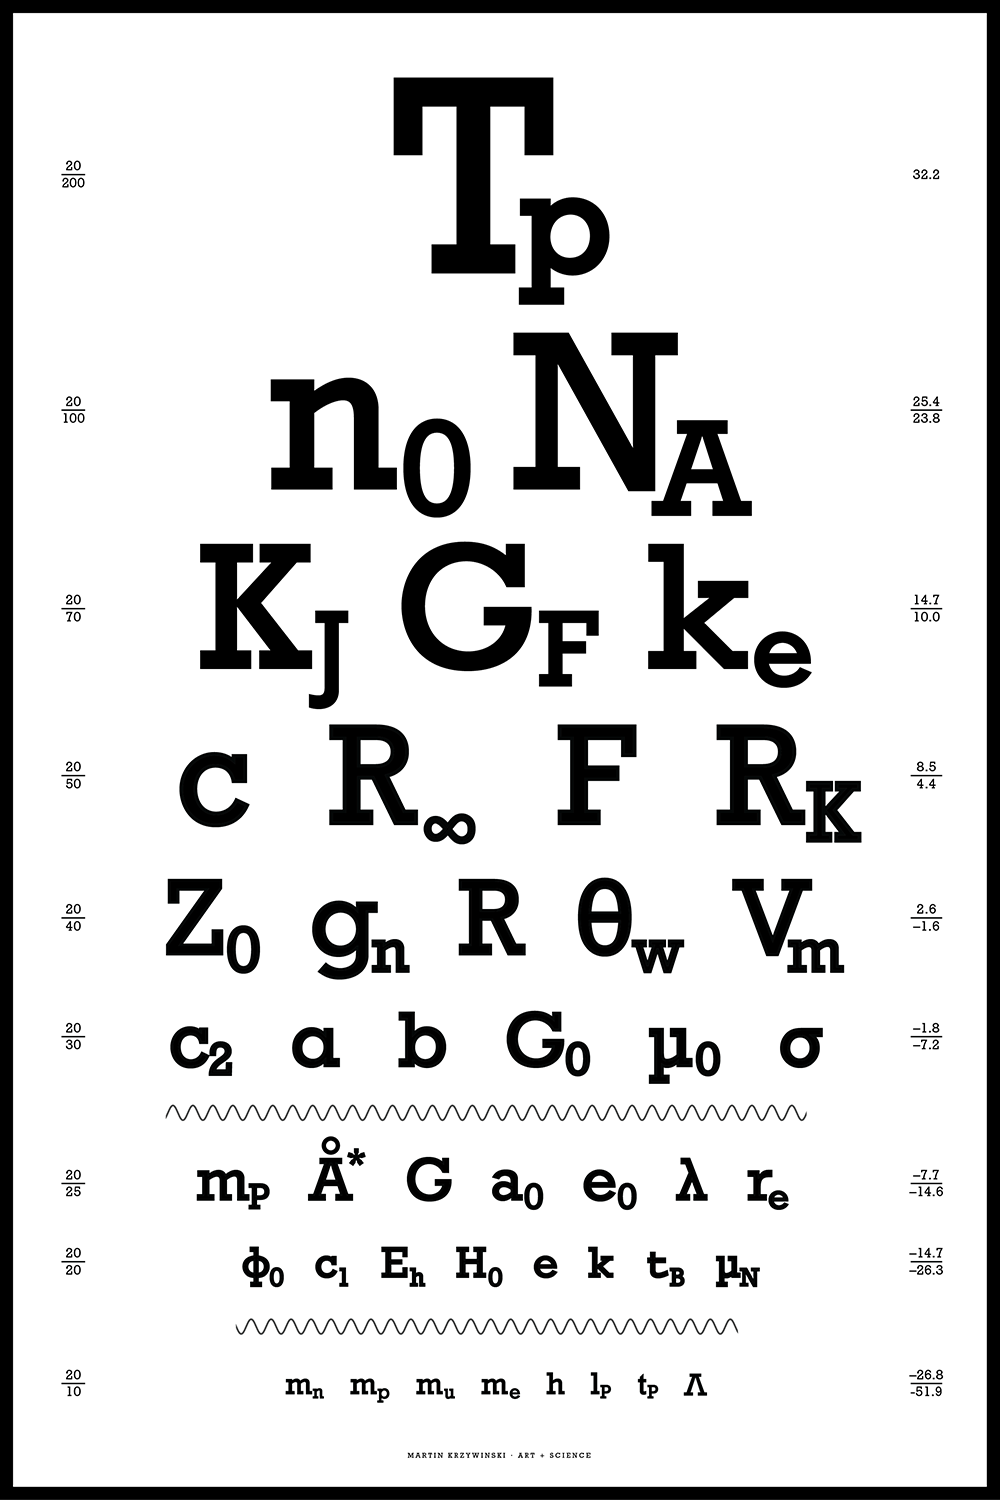 
Typographical posters of how the world works in the style of Snellen eye charts
 / Martin Krzywinski @MKrzywinski mkweb.bcgsc.ca